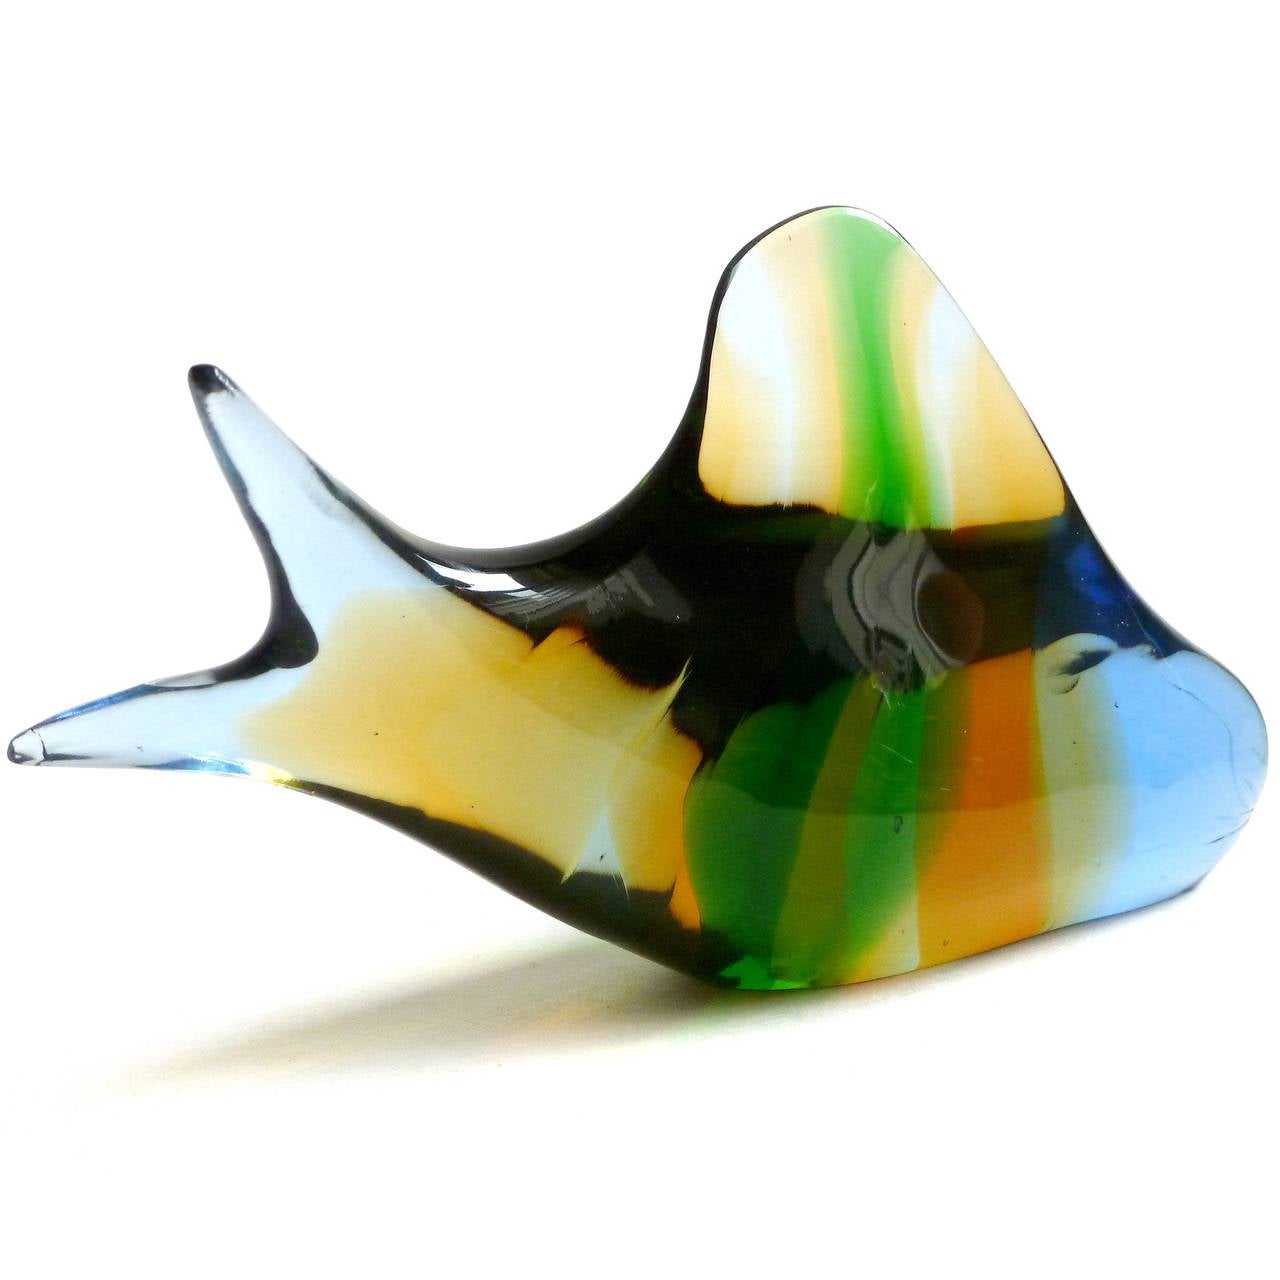 FREE Shipping Worldwide! See details below description.

Gorgeous Hand Blown Color Stripes Art Glass Fish Sculpture. It is marked with the Exbor Glassworks Czechoslovakia stamp. Designed by Josef Rozinek and Stanislav Honzik, circa 1950s. It has